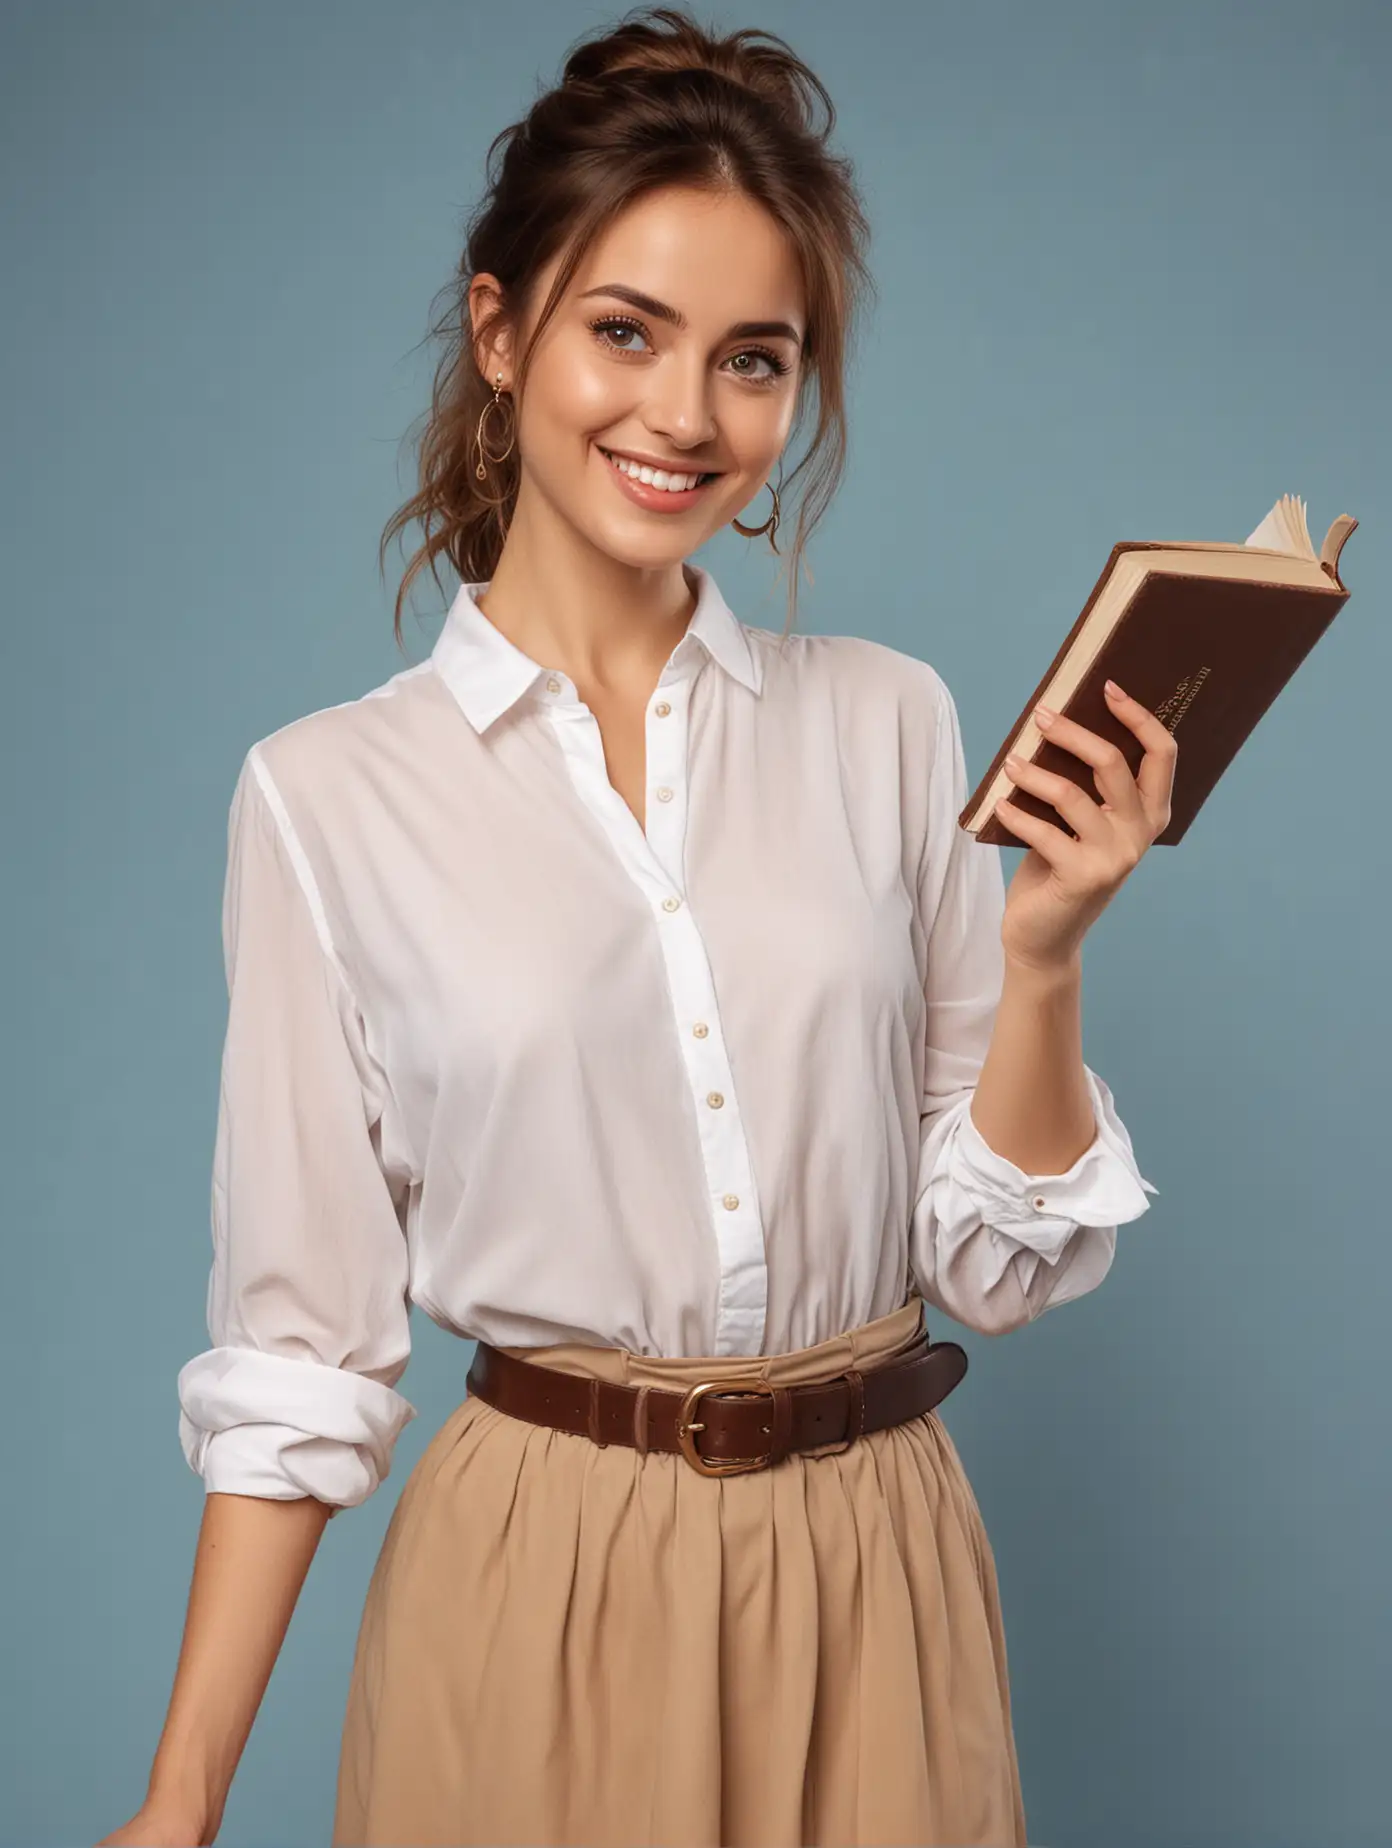 Photo of an attractive Russian woman holding out her hand with the book, wearing a white shirt and beige skirt with a brown belt, a black bag on her shoulder, a blue background, brown hair, an oval face shape, big eyes, golden earrings, looking at the camera, smiling